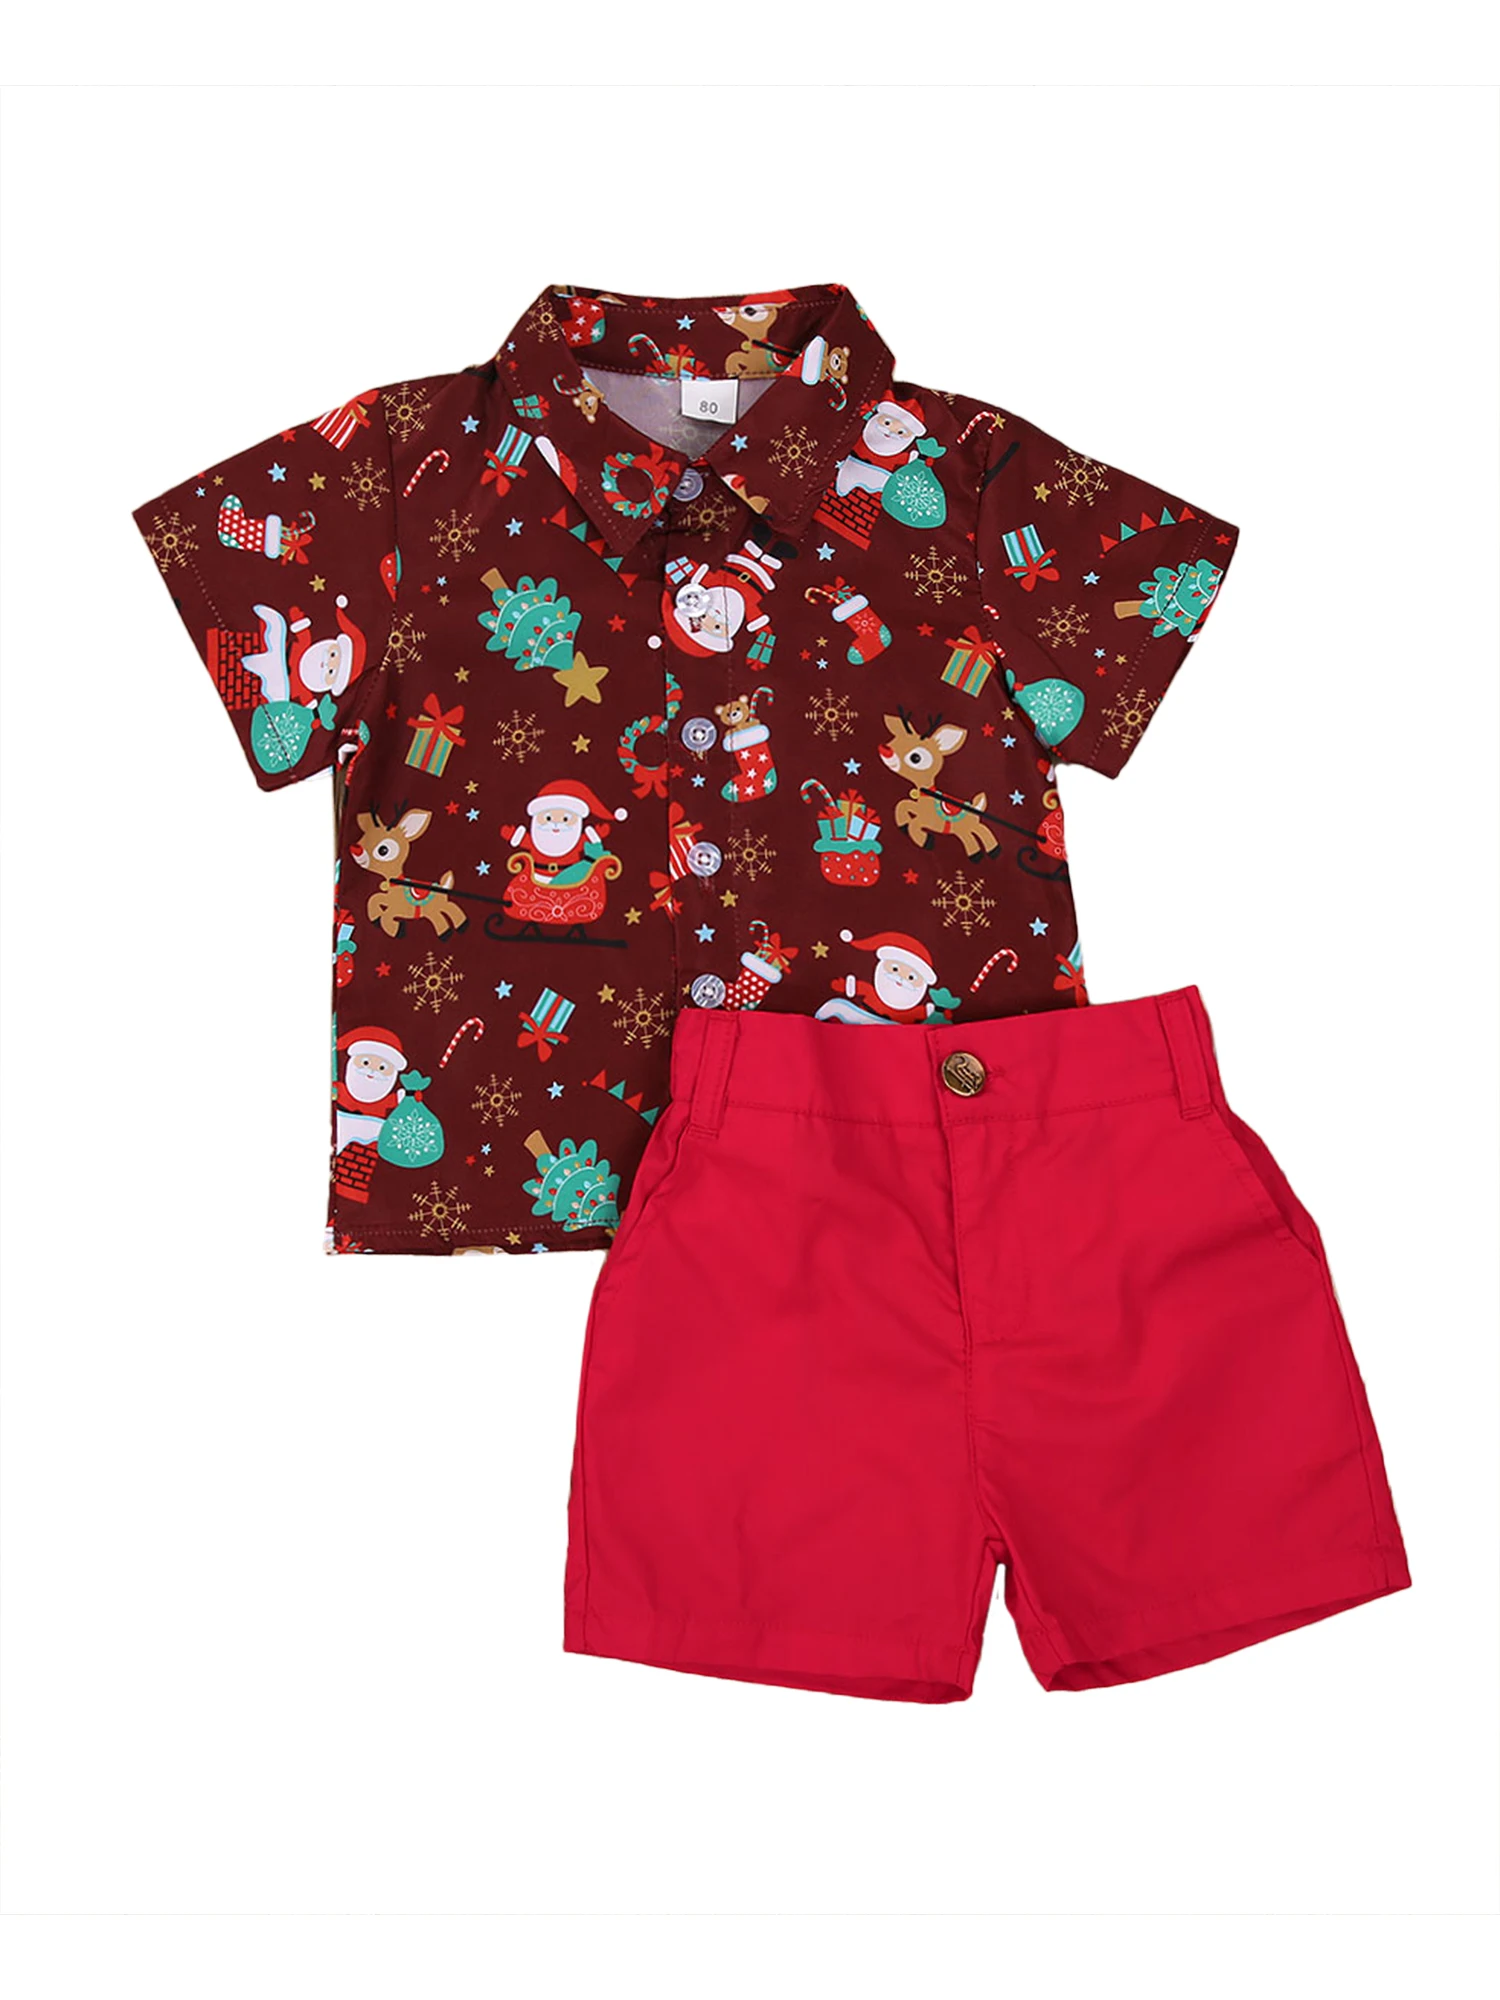 New 0-6 Years Baby Boy Christmas Clothes Set Kids Short Sleeve Print Shirts Toddler Red Shorts Gentalmen Suit Kid Santa Outfit